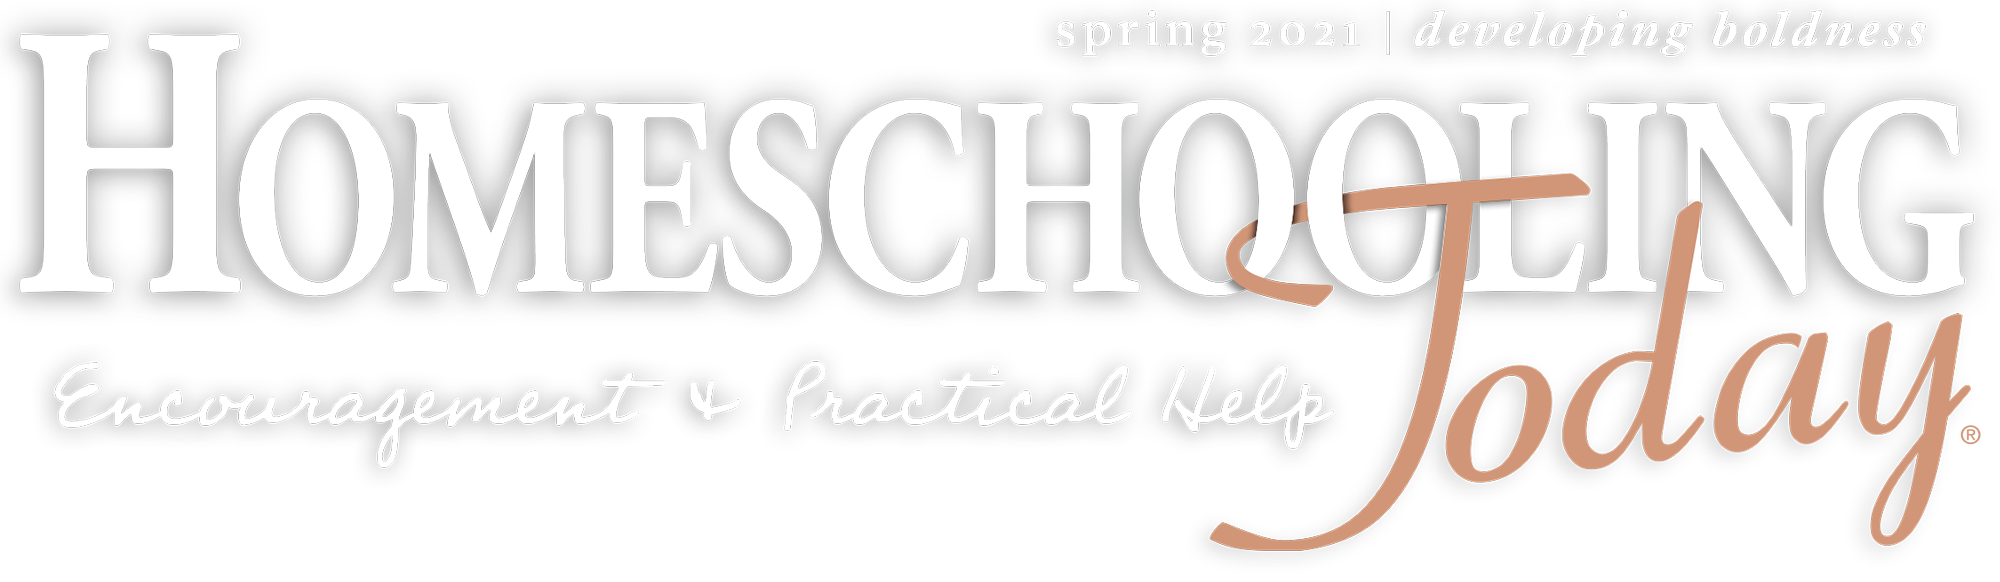 Homeschooling Today Spring 2021 cover logo in white and brown